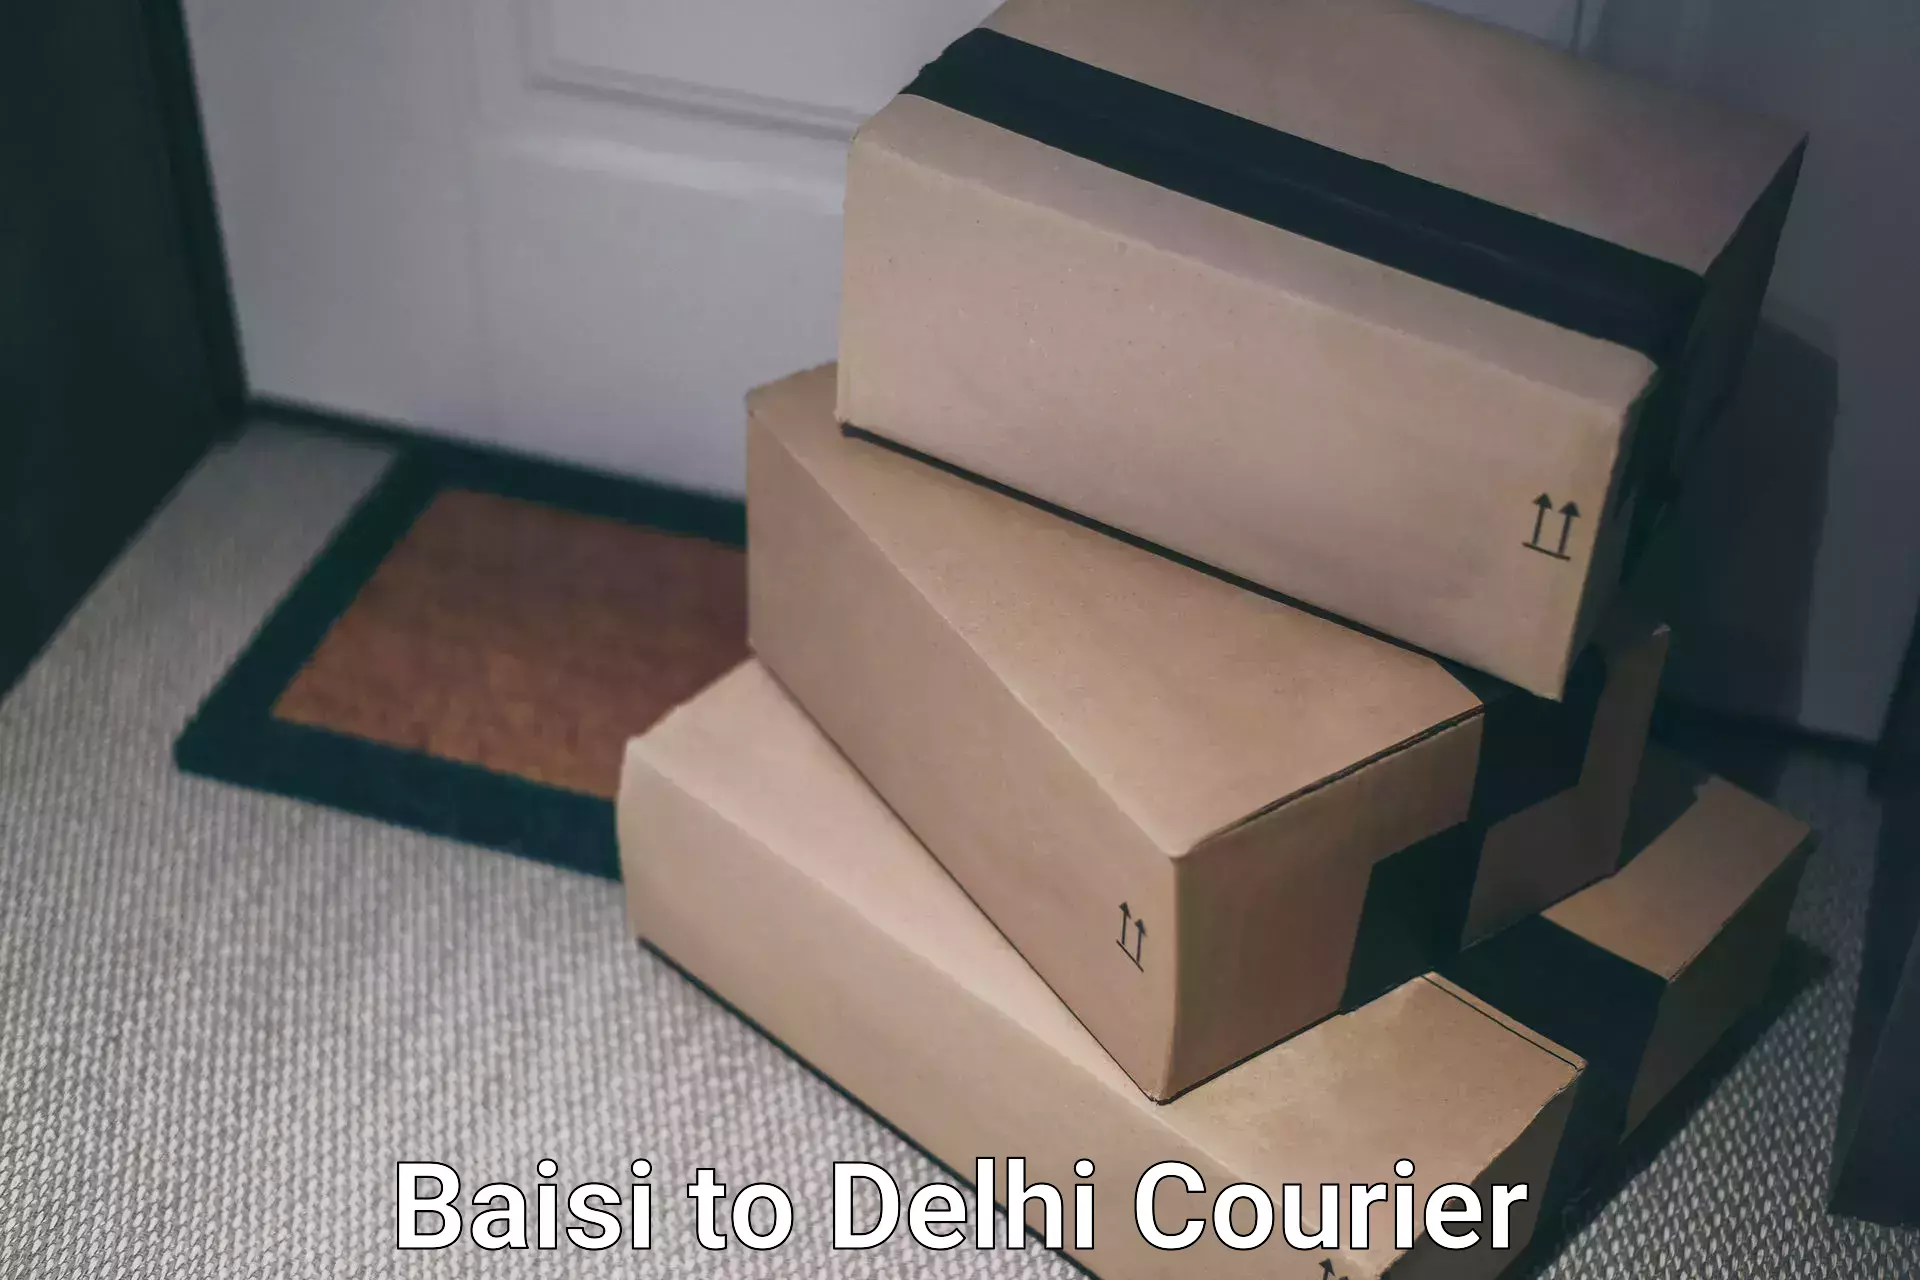 Quick dispatch service Baisi to Lodhi Road